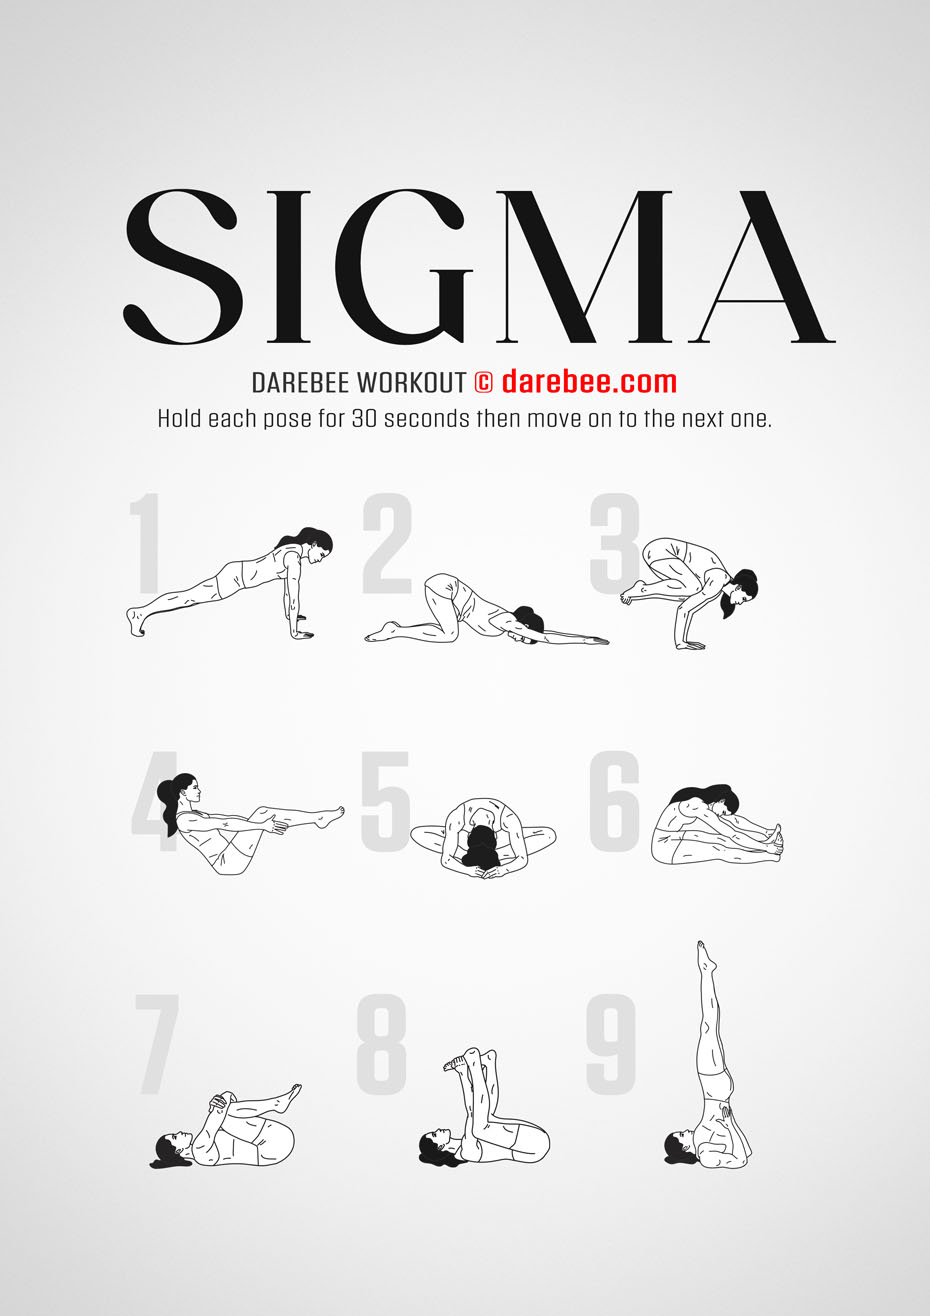 Sigma is a DAREBEE yoga-based home fitness stretch and strength workout that helps you redefine your mobility and increase your agility.